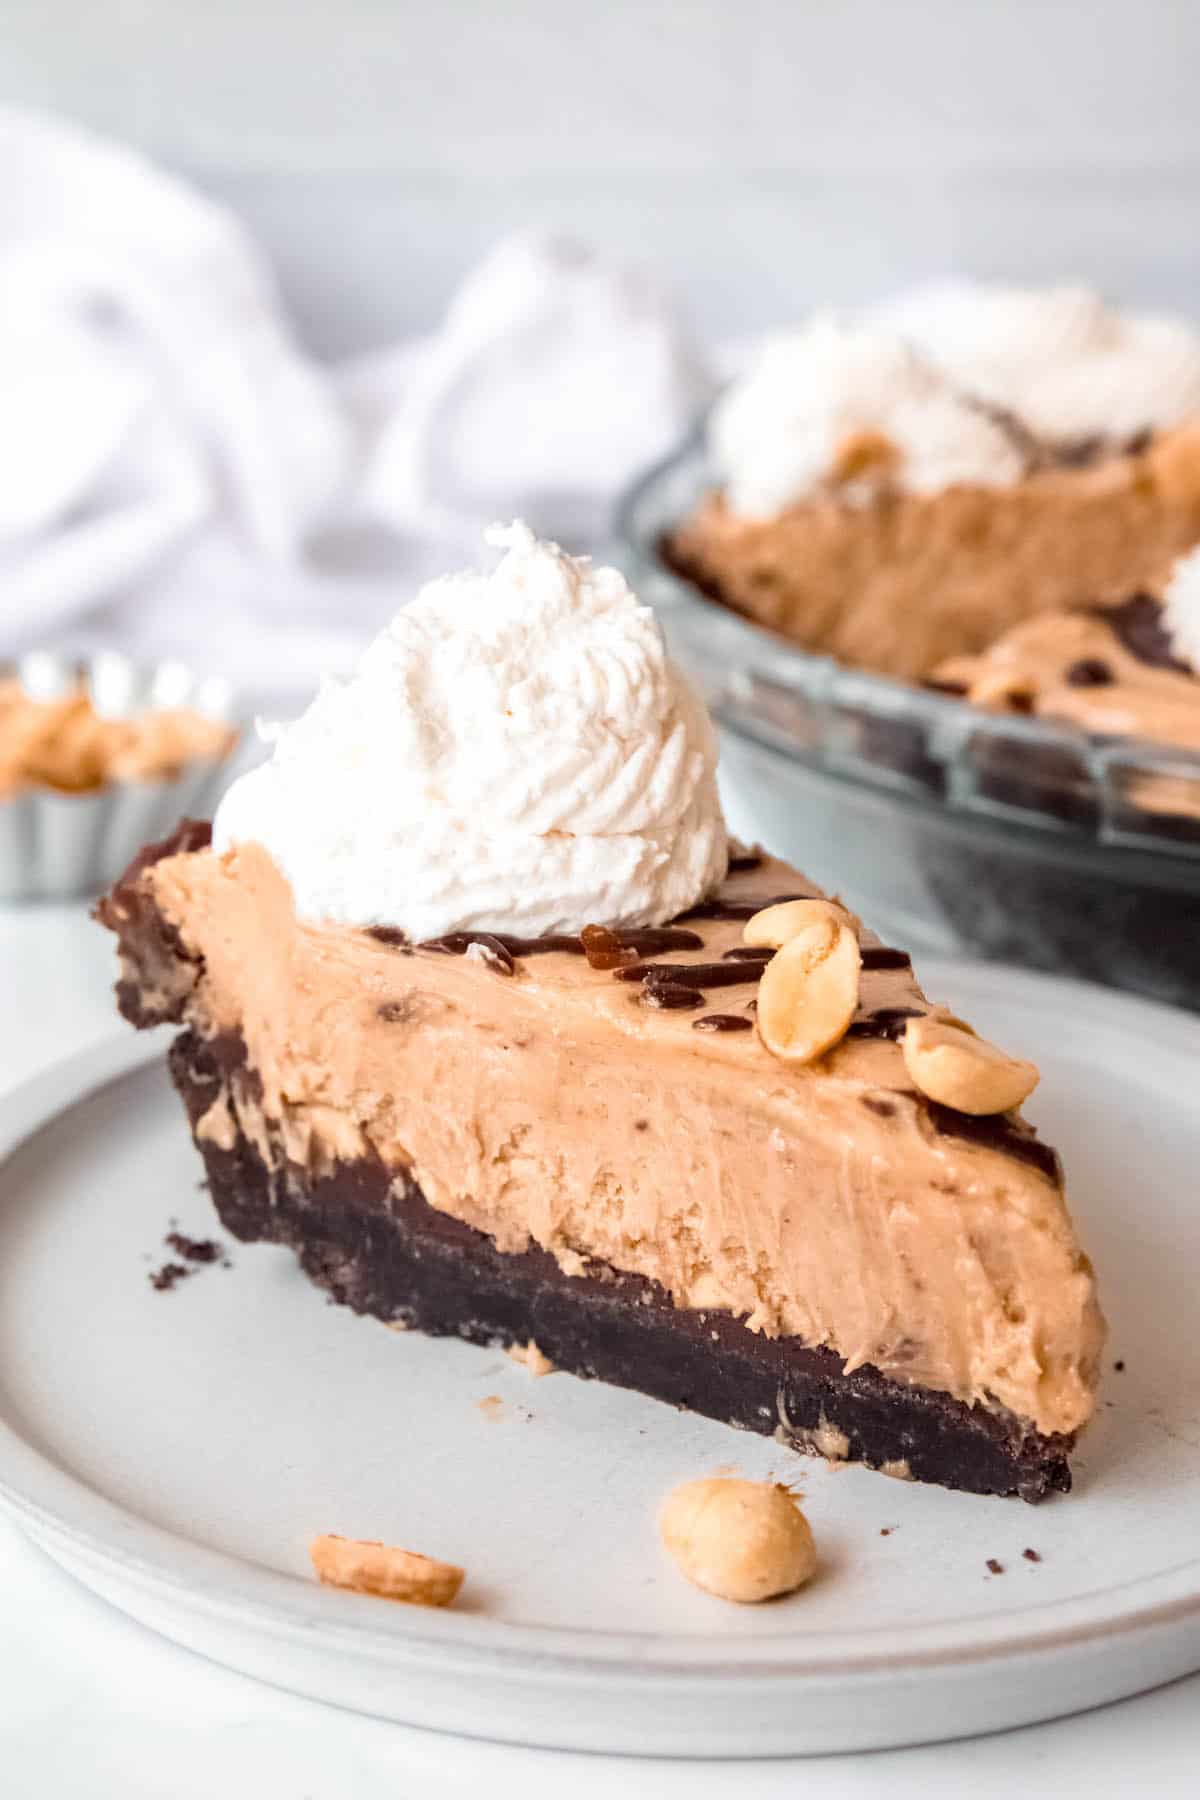 45 degree angle shot of a slice of chocolate peanut butter ganache pie on a white dessert plate with the rest of the pie blurred in the background.